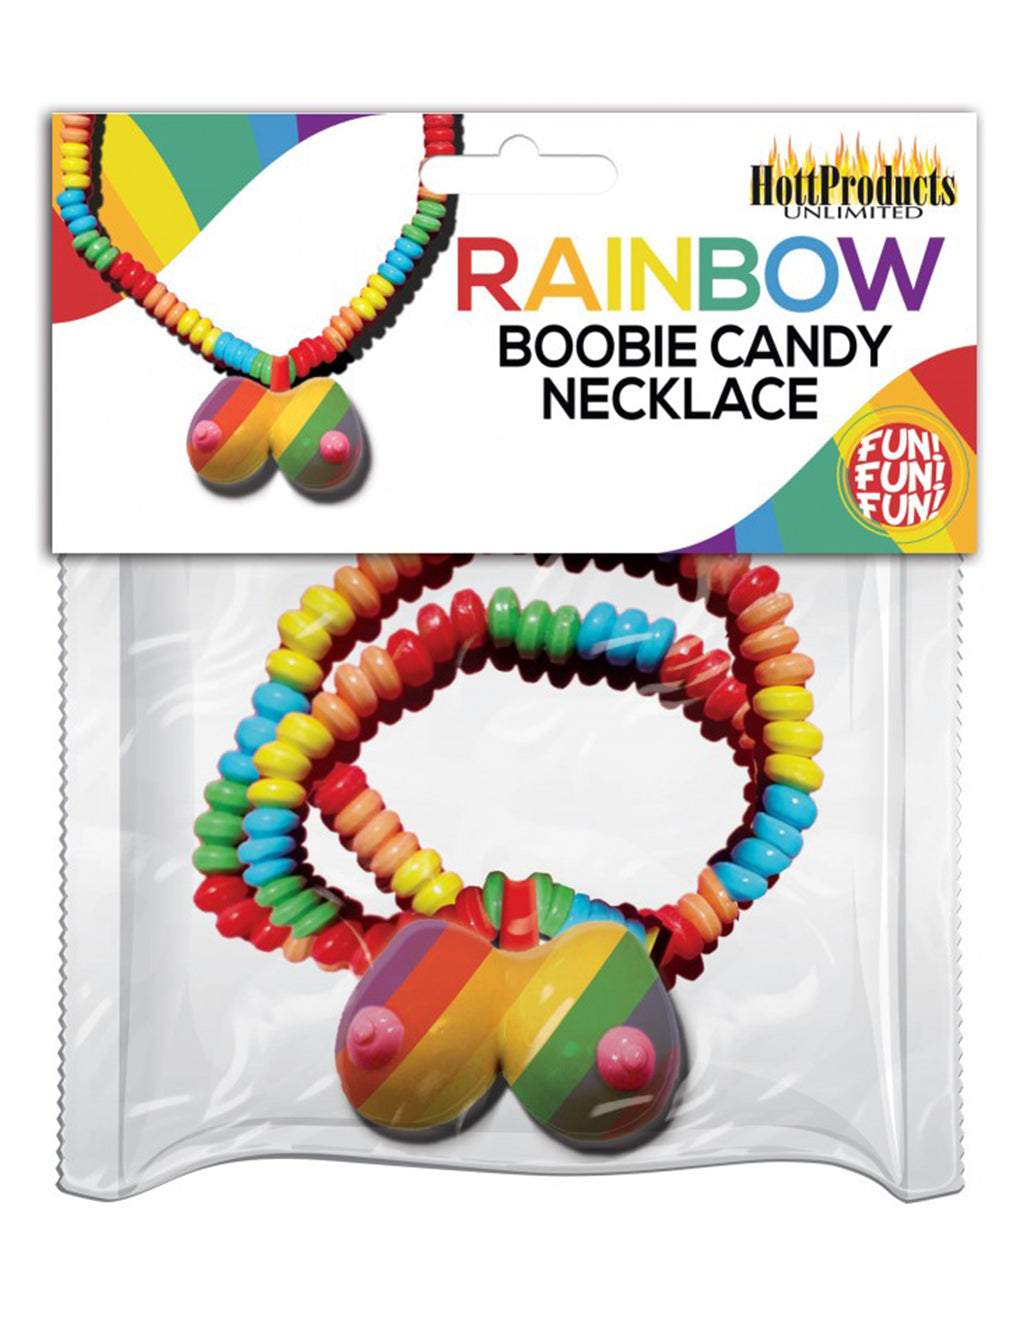 Rainbow Boobie Candy Necklace- Package